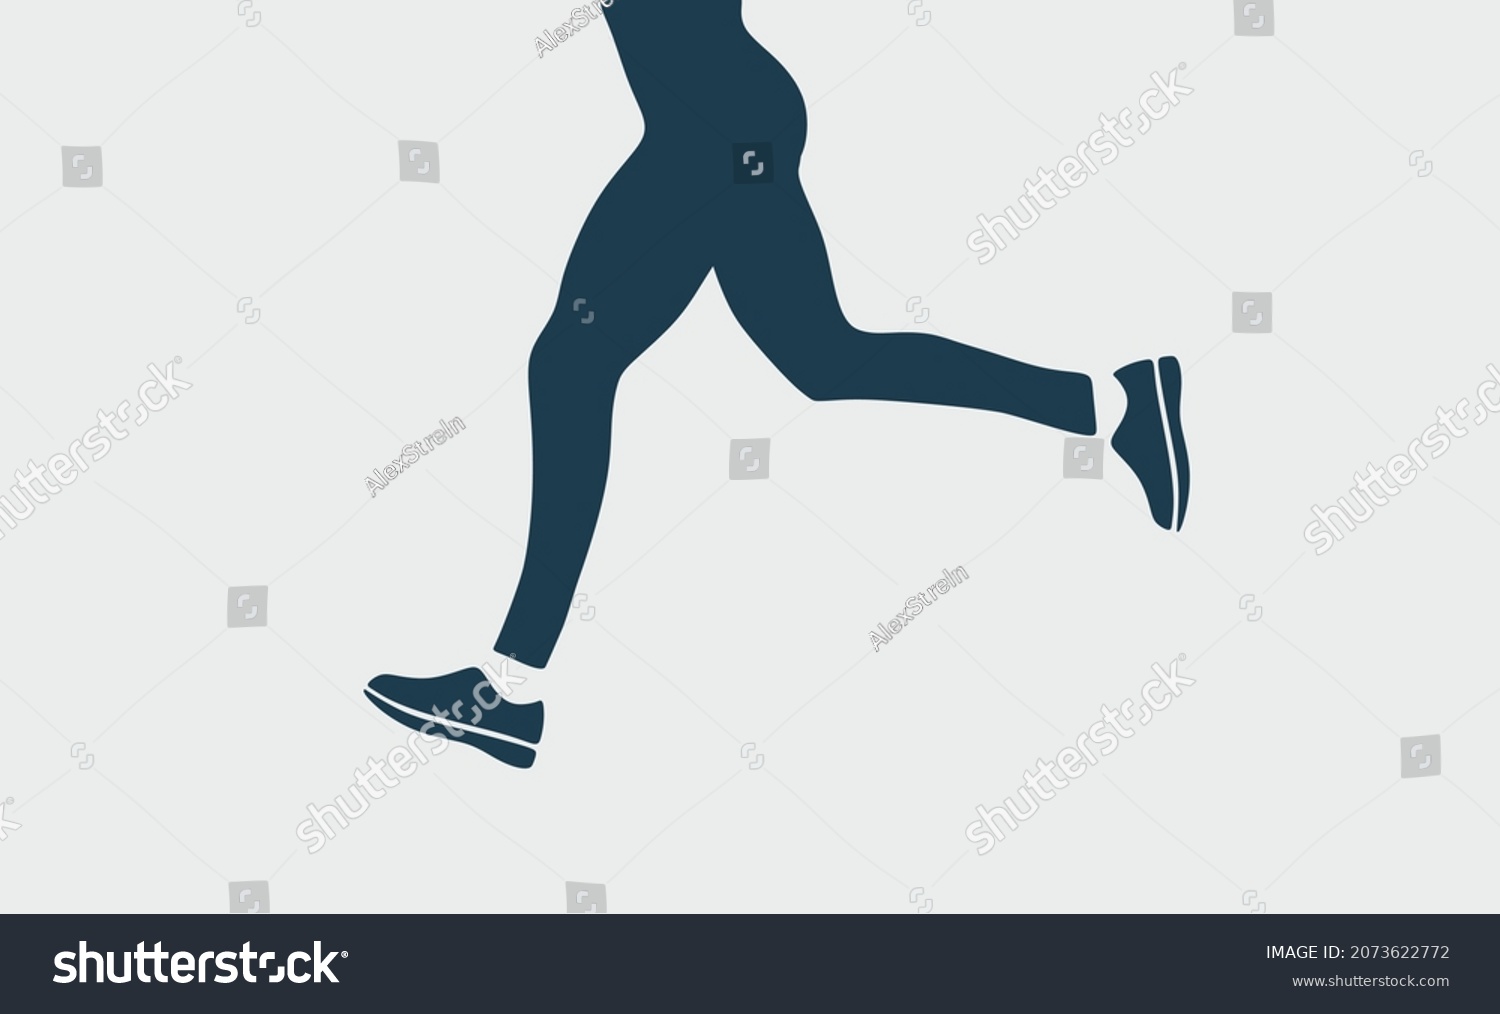 SVG of Run. Jogging. SVG. Man or woman running outside in shorts and lace up sneakers. Runner training. Active leisure. Health lifestyle.Outdoor recreation activity. Color flat vector  illustration.Isolated. svg